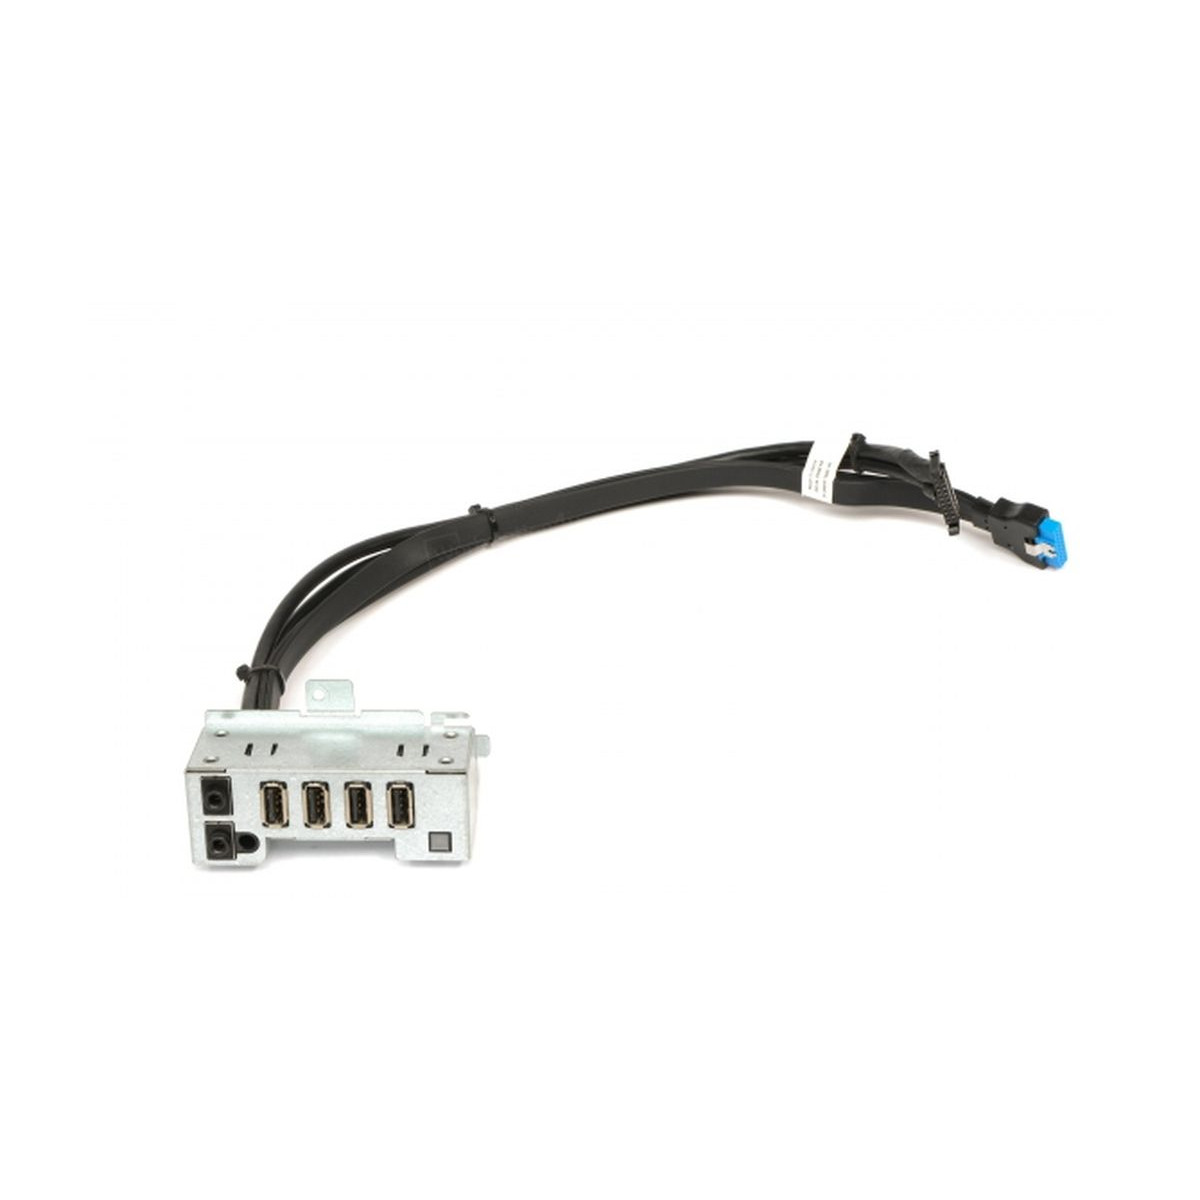 FRONT CONTROL USB PANEL DELL T1700 0PRFY8